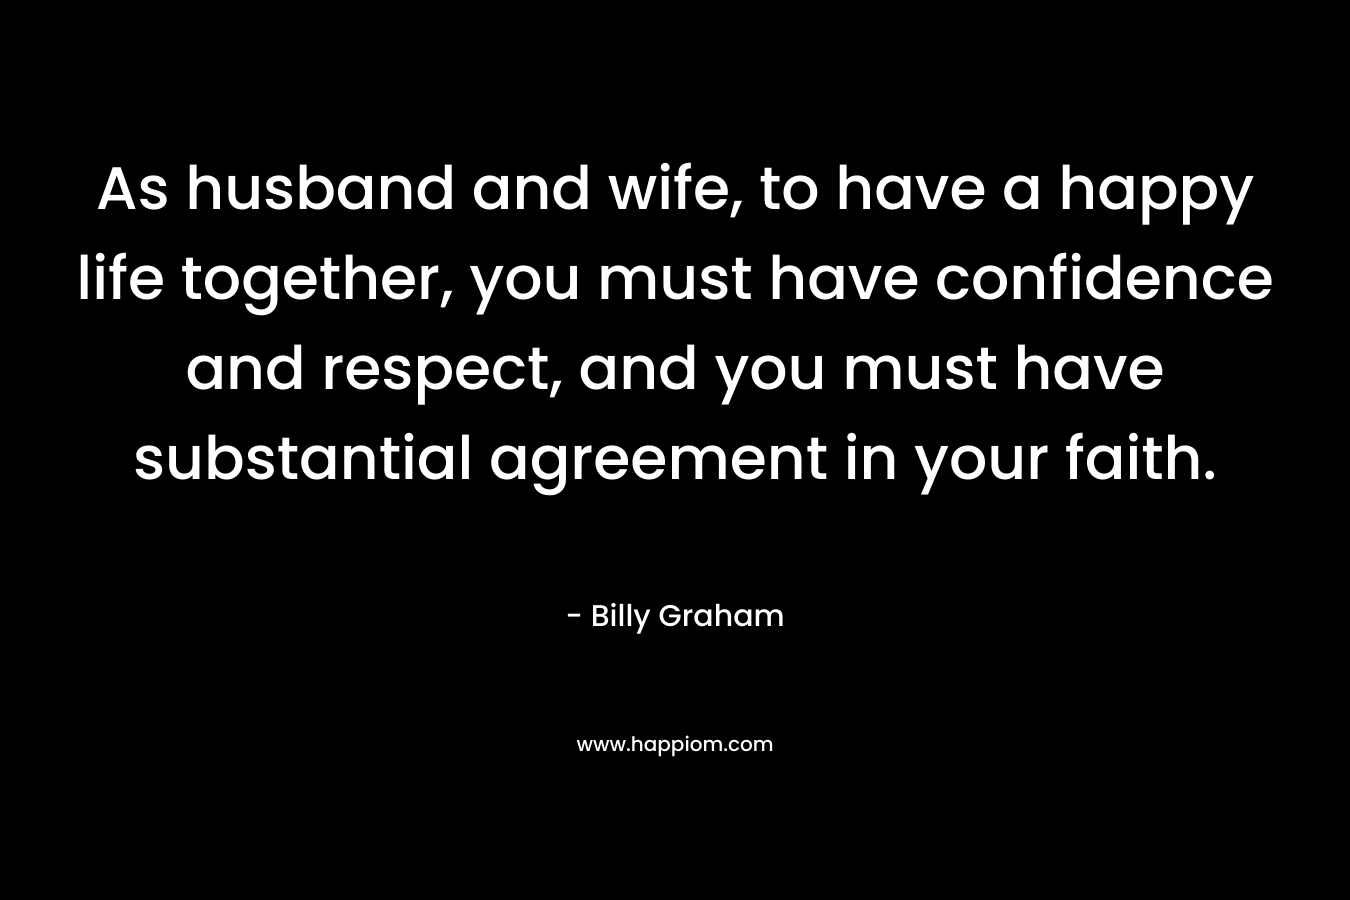 As husband and wife, to have a happy life together, you must have confidence and respect, and you must have substantial agreement in your faith.